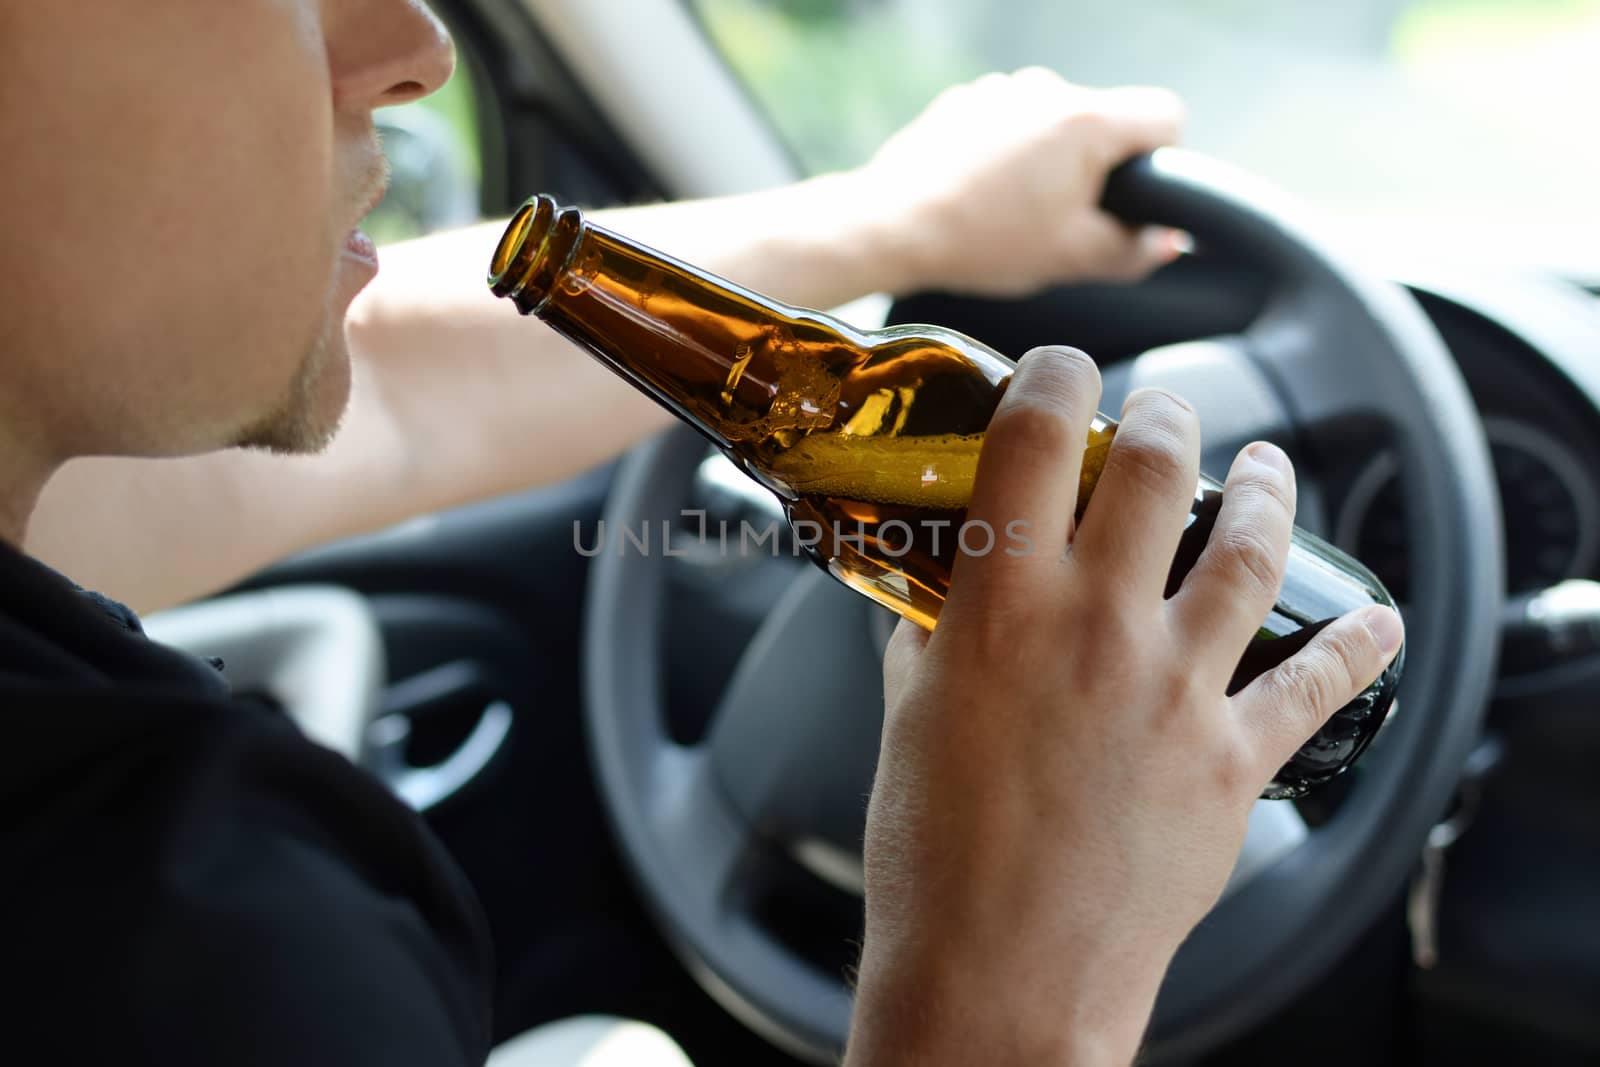 Do not drive under the influence of alcohol by wdnet_studio